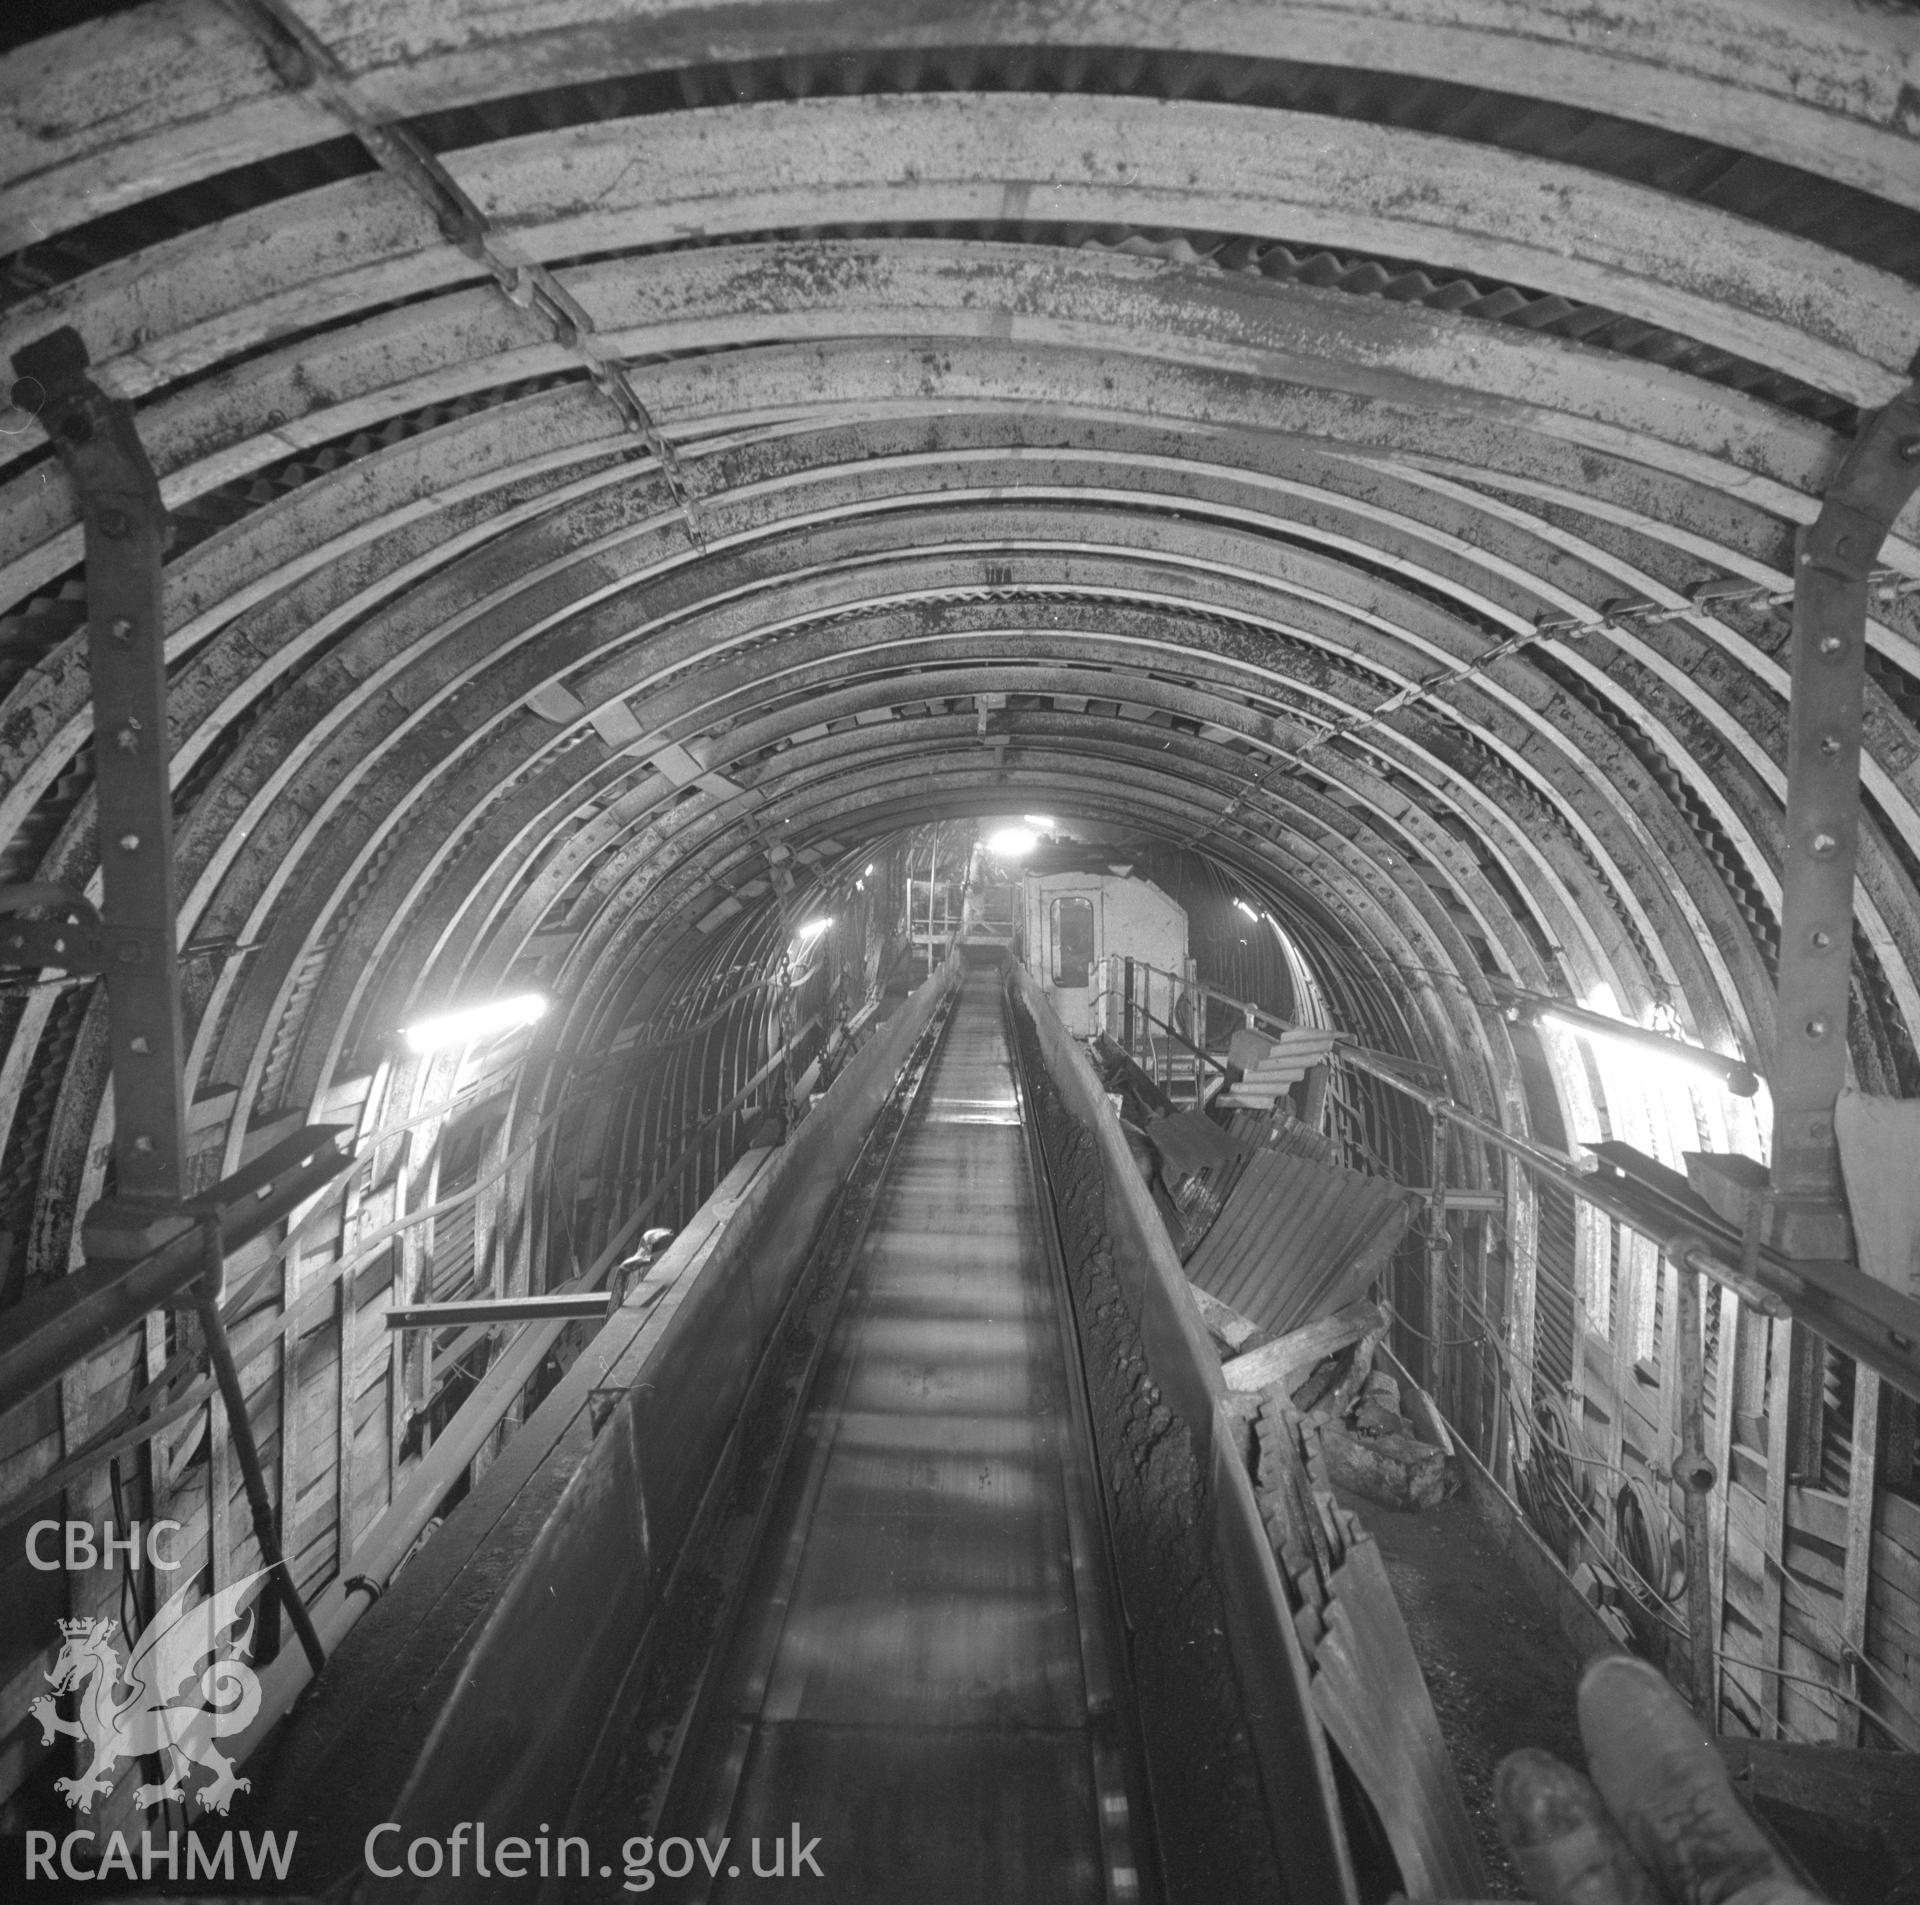 Digital copy of an acetate negative showing interior of underground bunker at Oakdale Colliery, from the John Cornwell Collection.